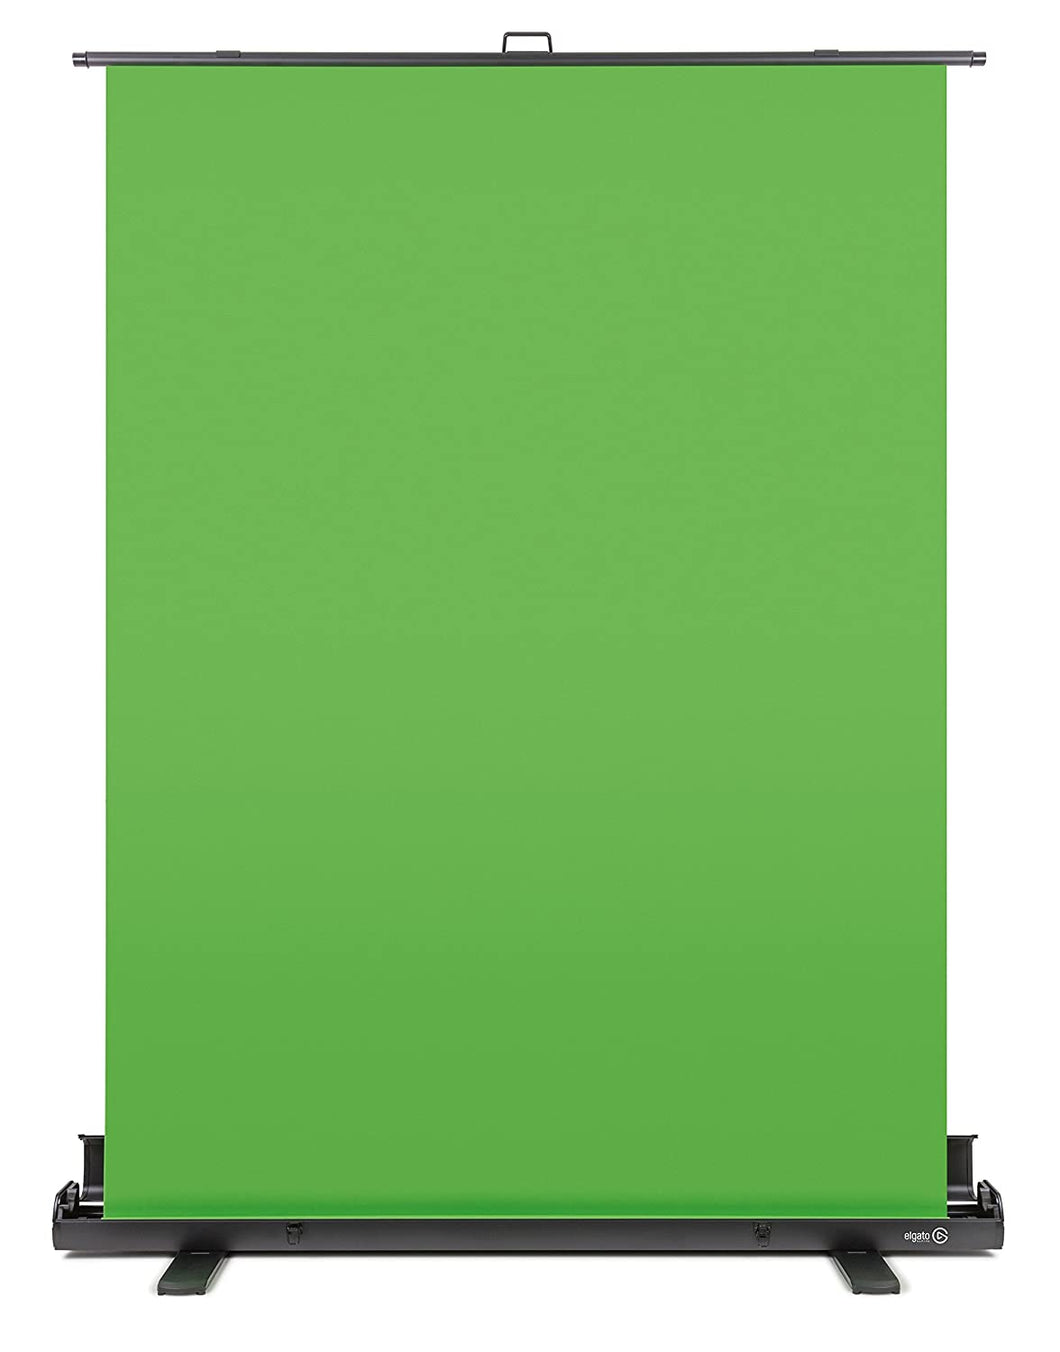 Elgato Green Screen - Collapsible chroma key panel for background removal with auto-locking frame, wrinkle-resistant chroma-green fabric, aluminum hard case, ultra-quick setup and breakdown